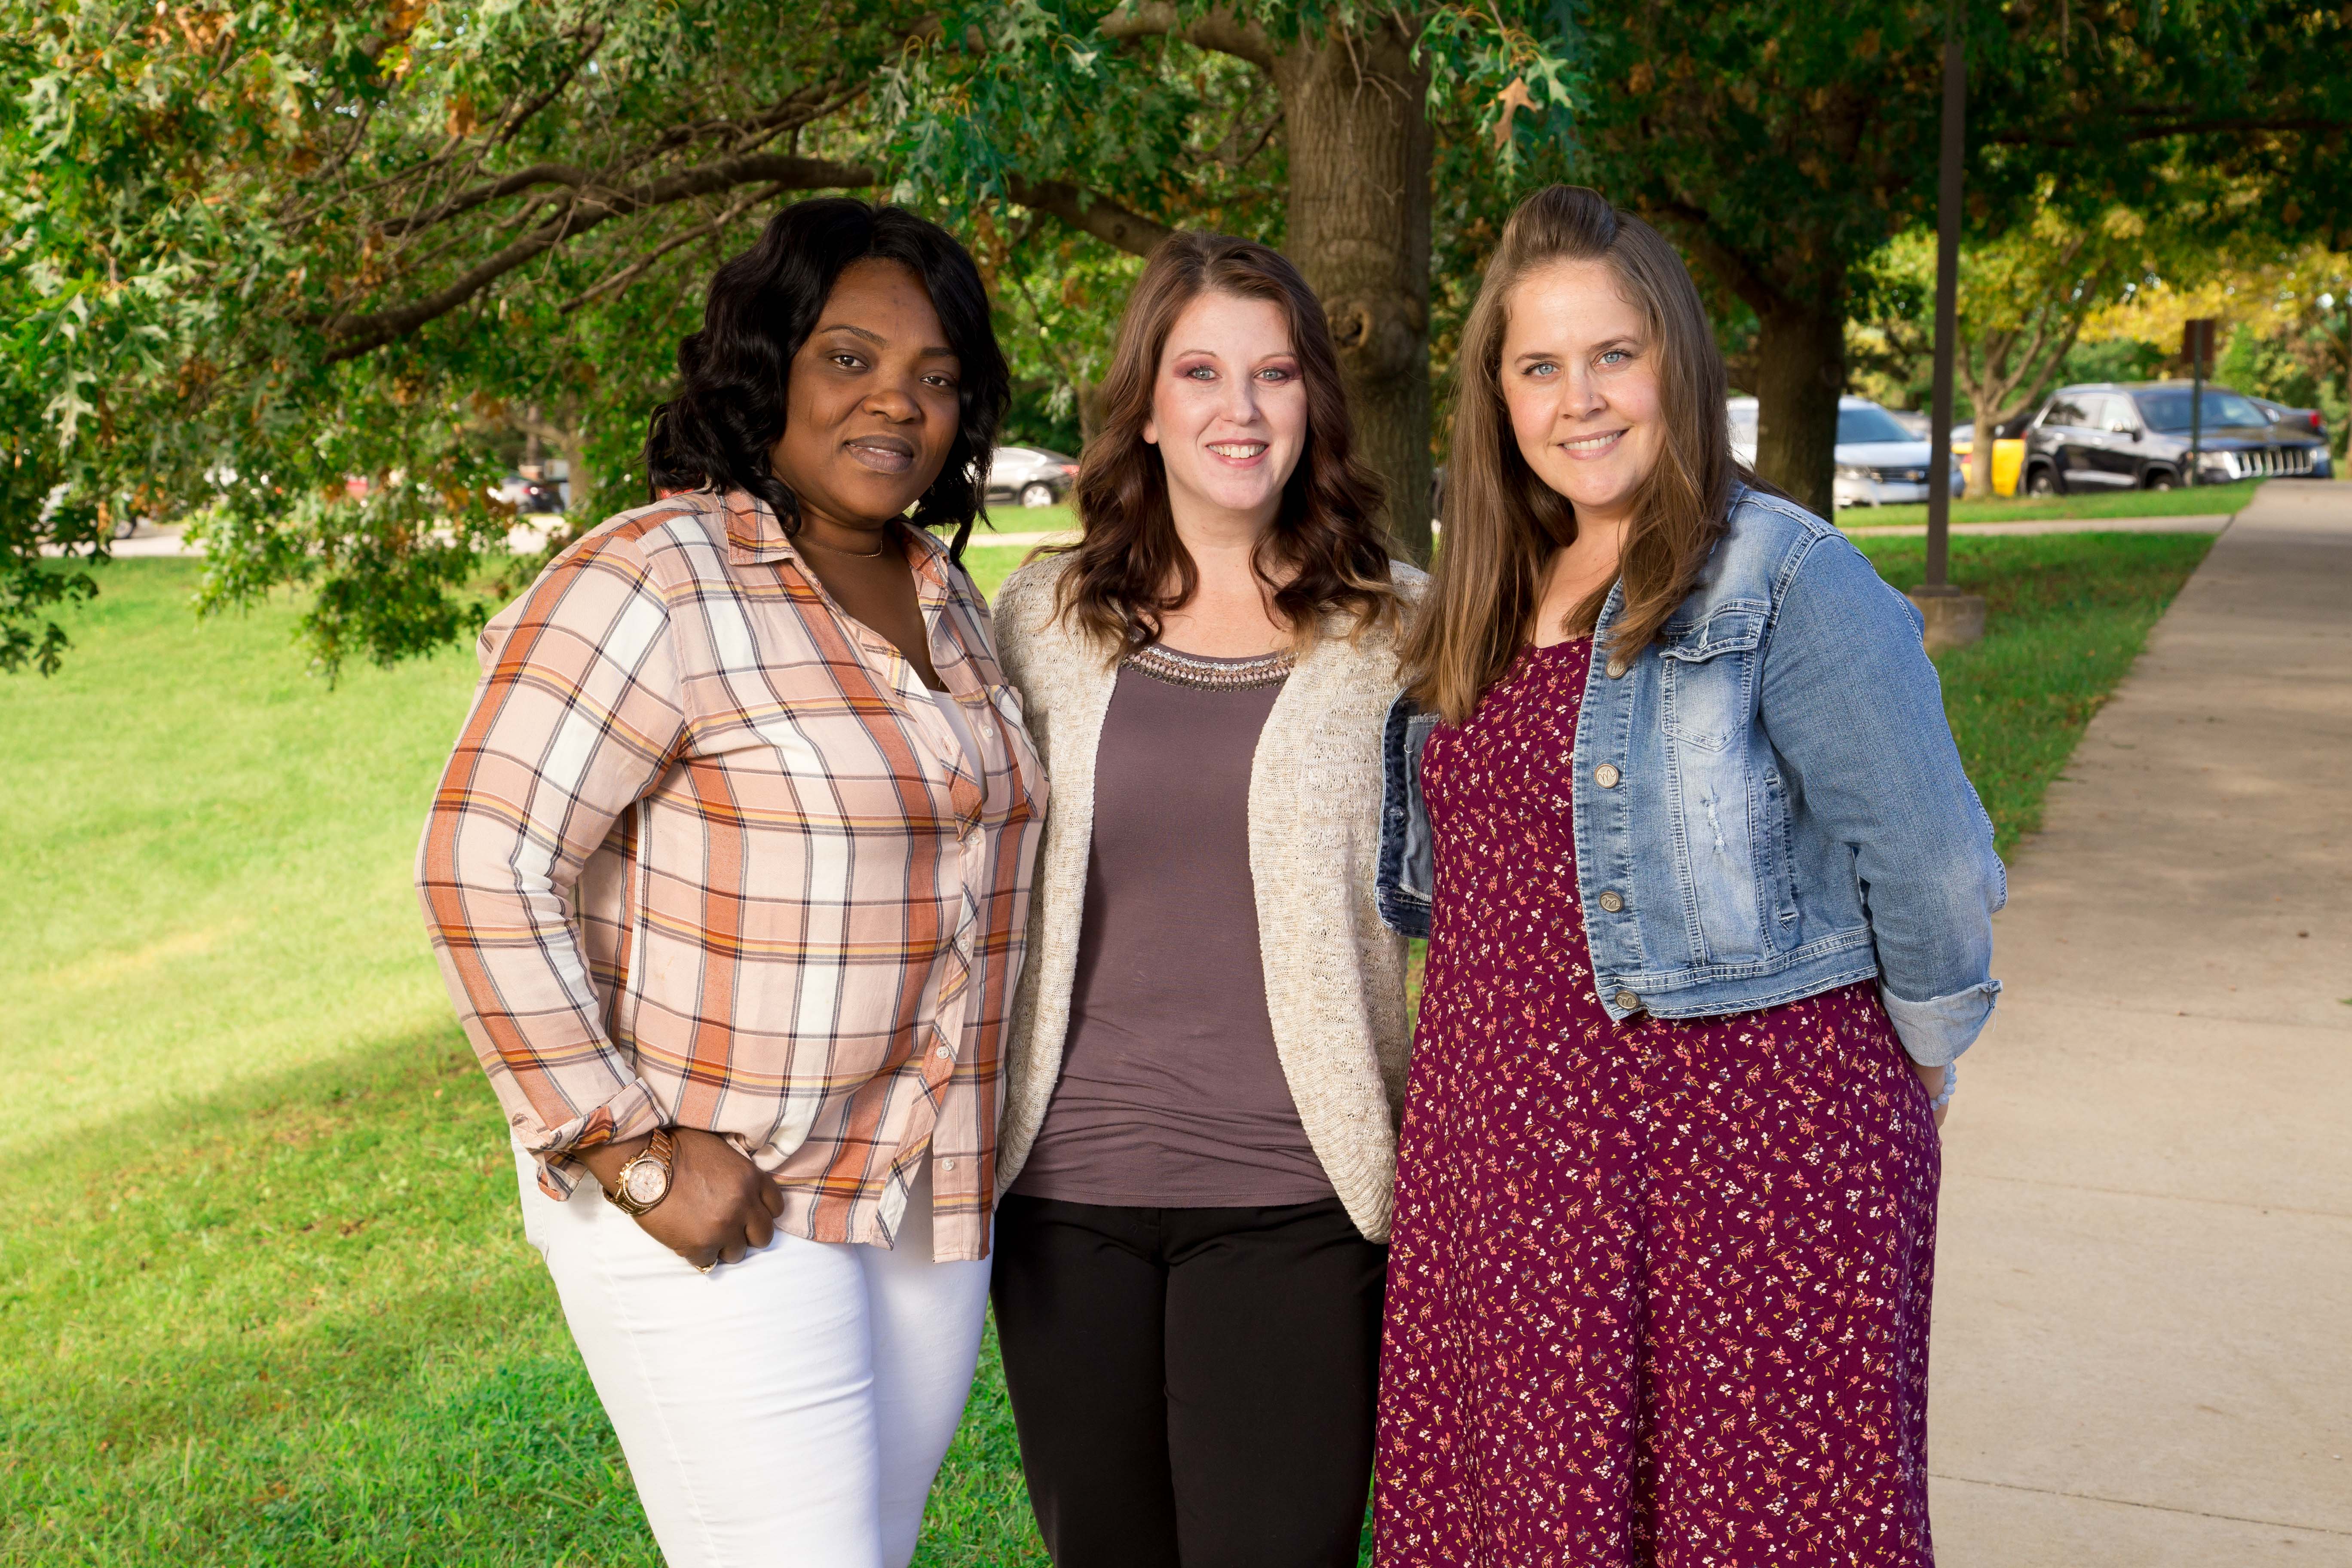 Barton Community College students (from left) Annick Adjovi-Segning, Rebecca Grindle and Susie Thorne pose for a photo outside Barton’s Fort Leavenworth campus.